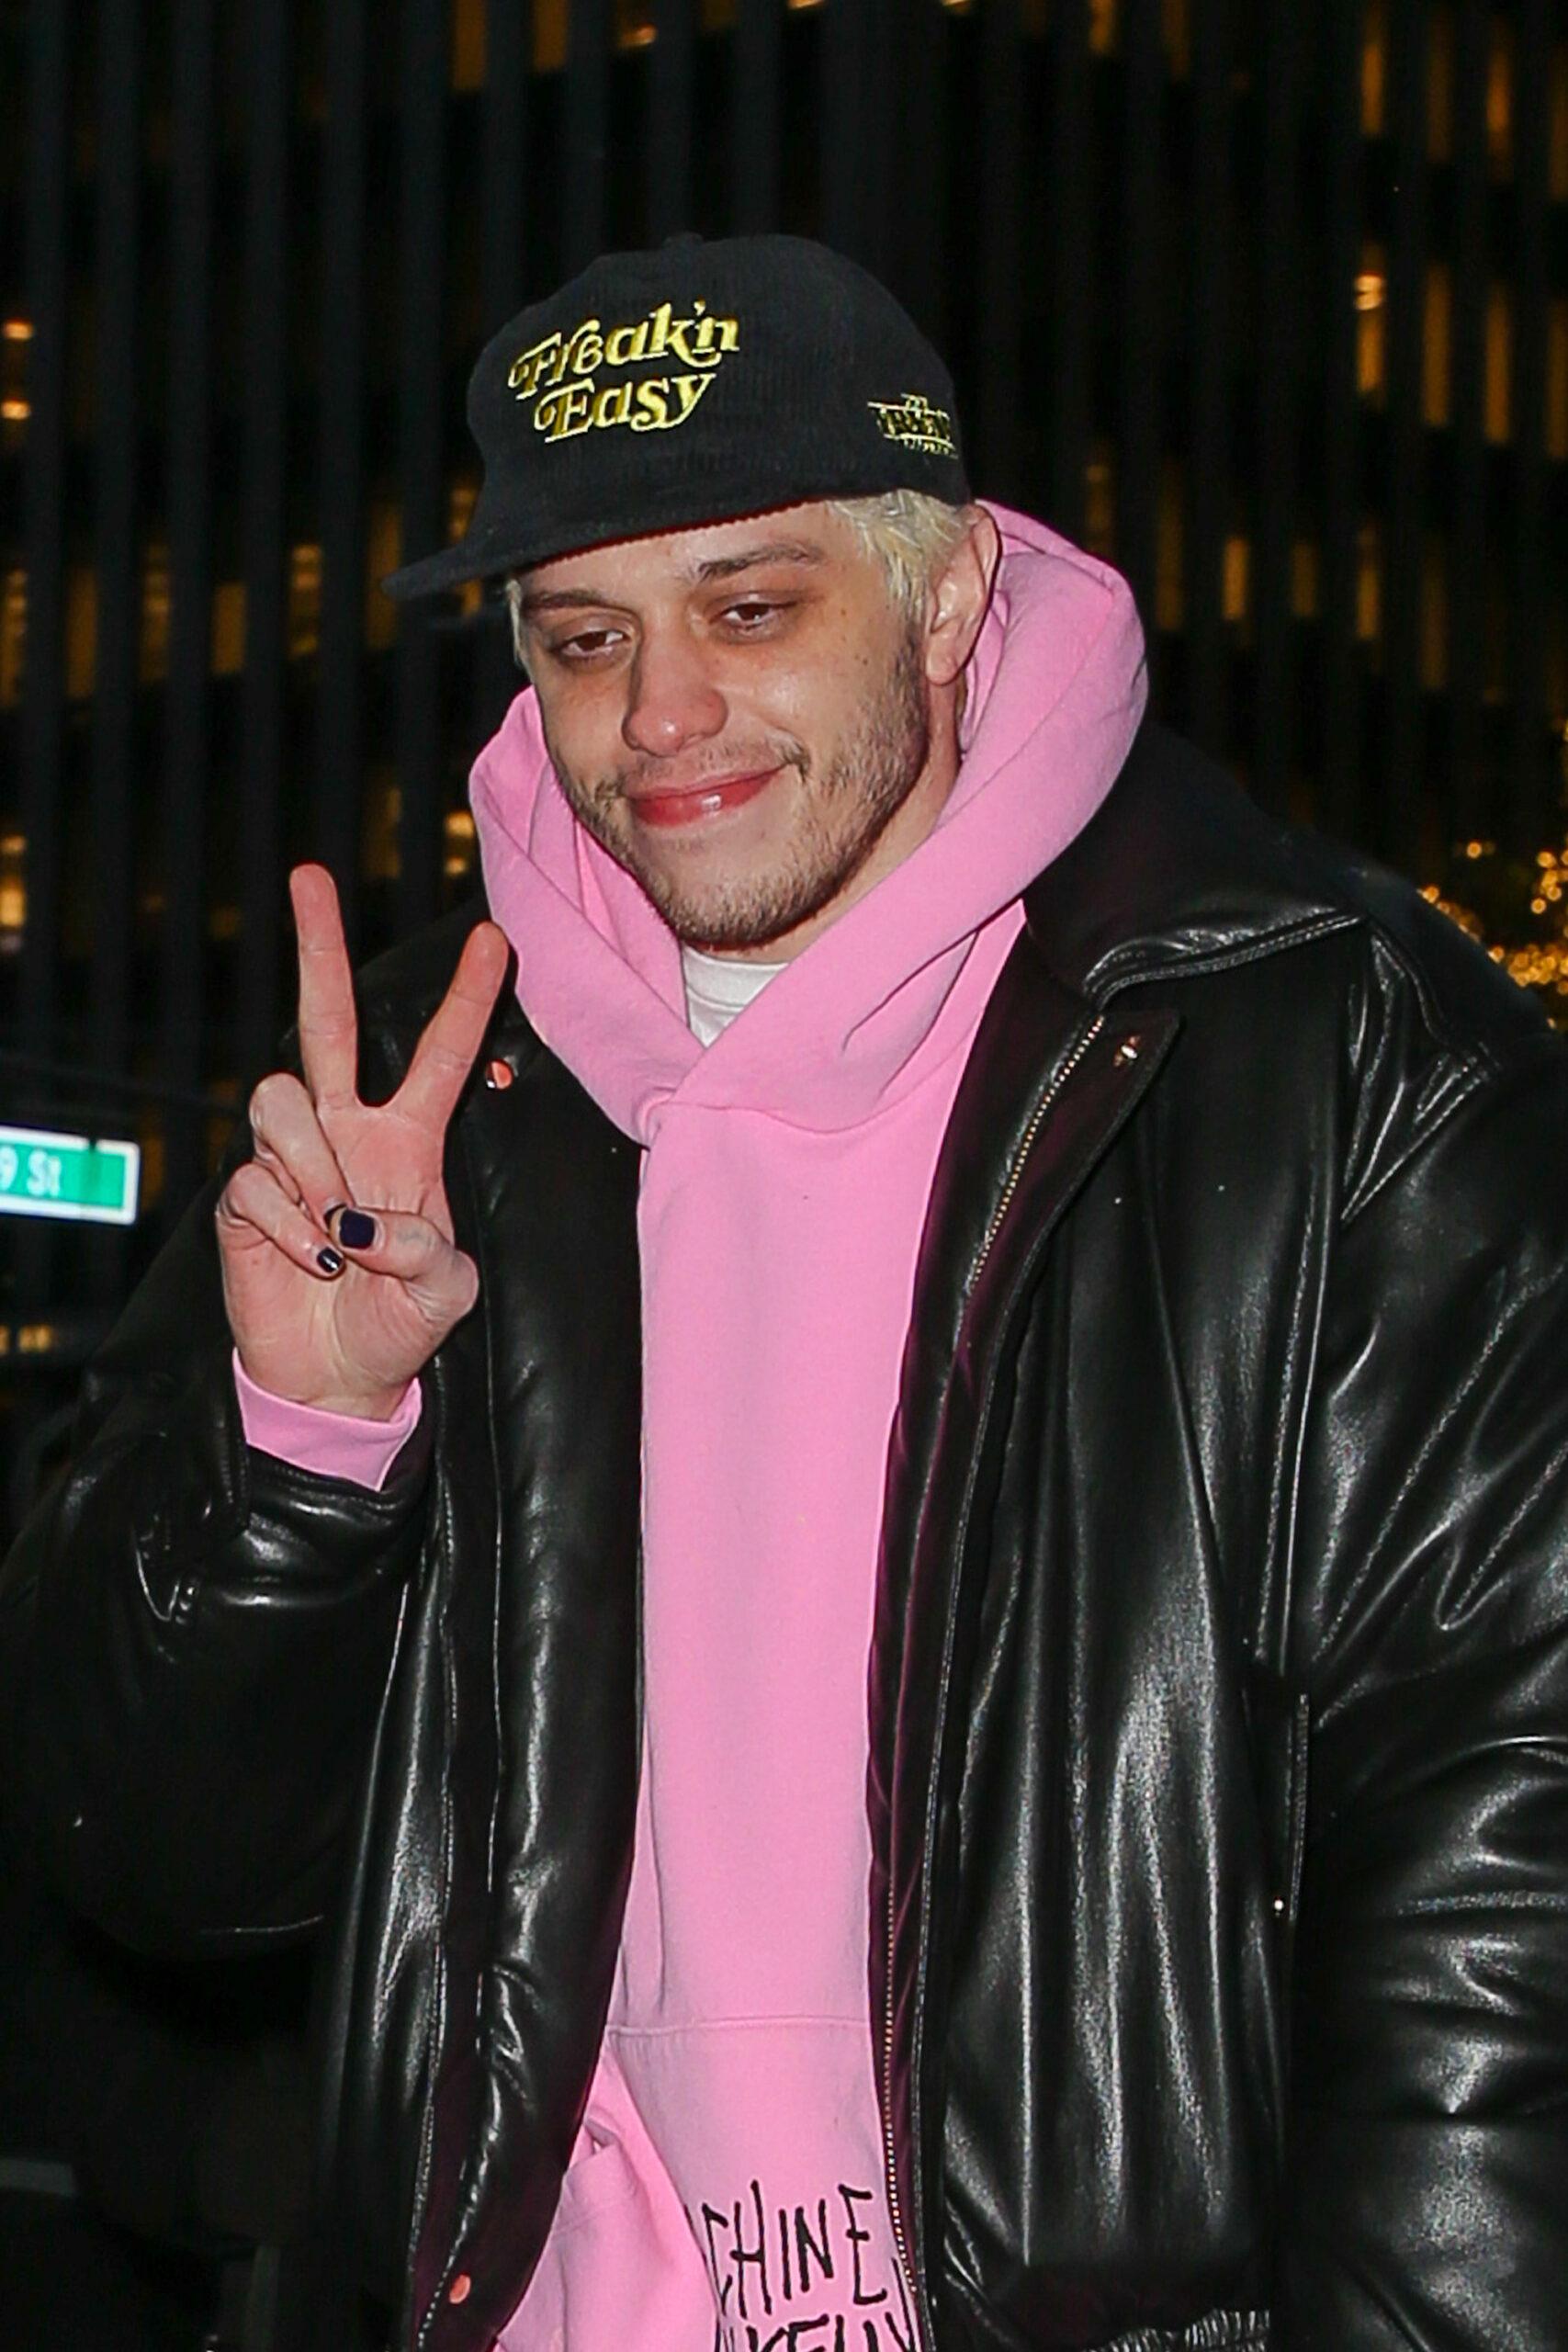 Pete Davidson seen at the NBC studios for his appearance at The Tonight Show Starring Jimmy Fallon in New York City